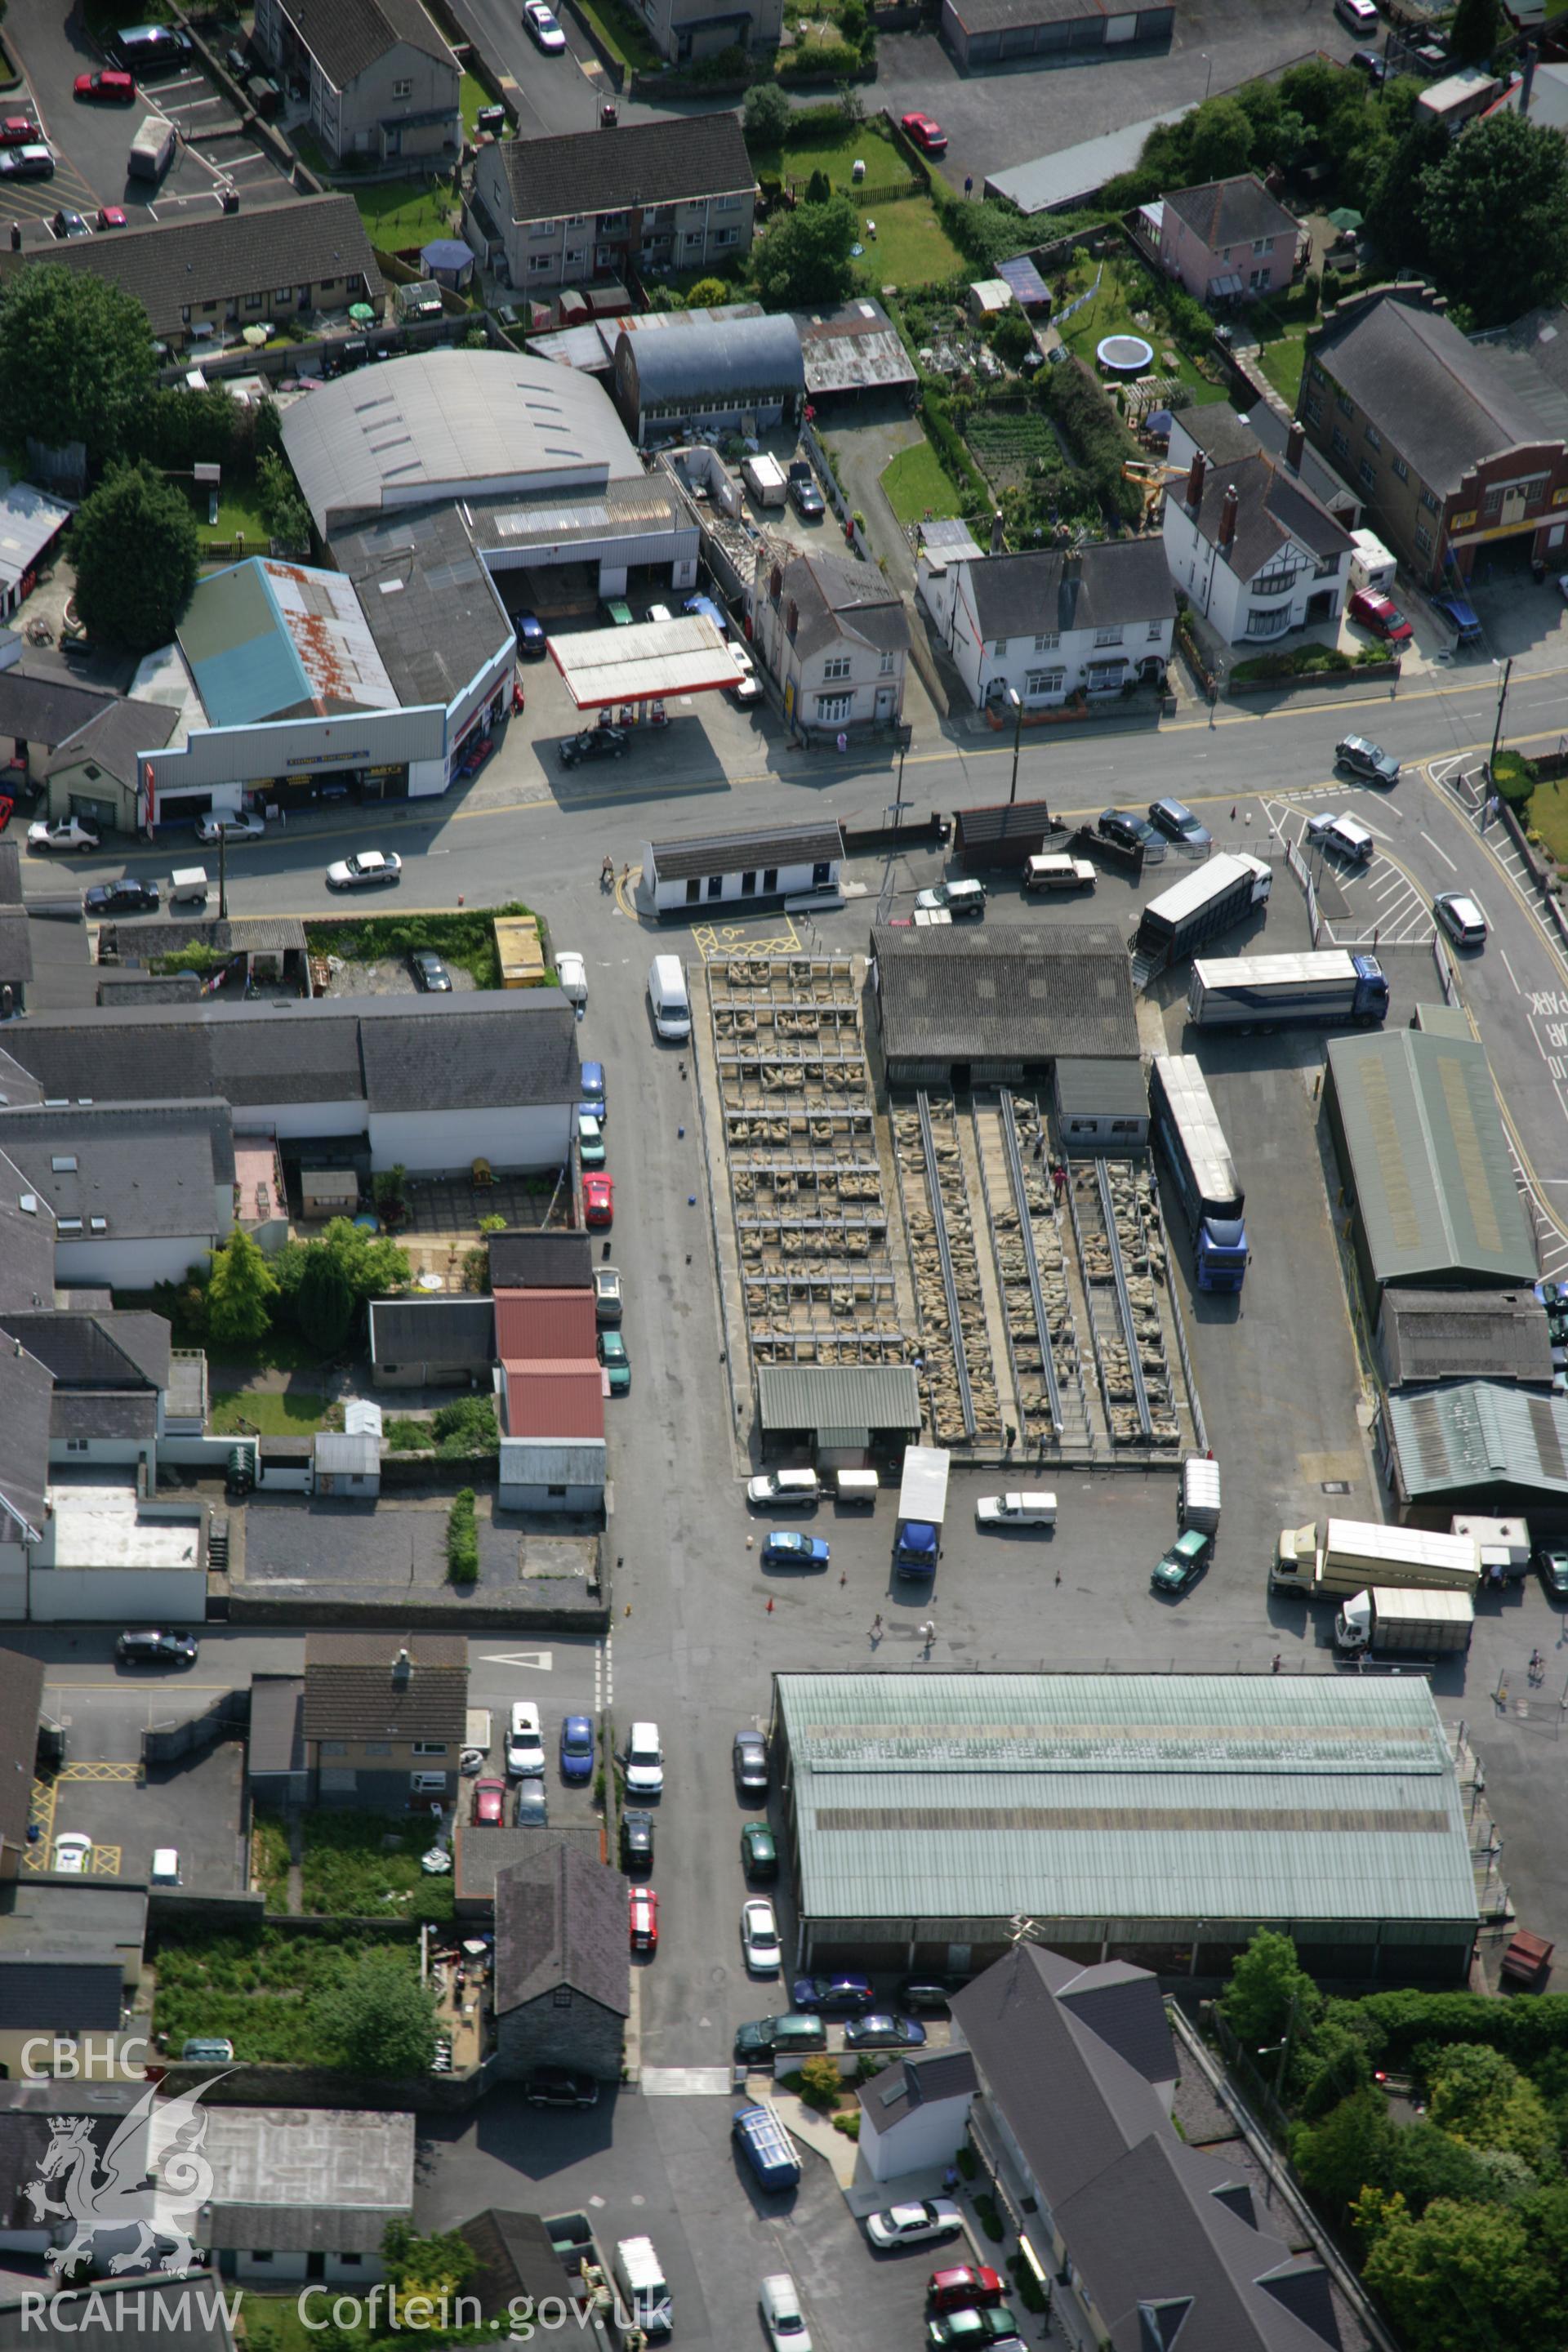 RCAHMW colour oblique aerial photograph of Newcastle Emlyn, showing view of livestock market from the north-east. Taken on 08 June 2006 by Toby Driver.